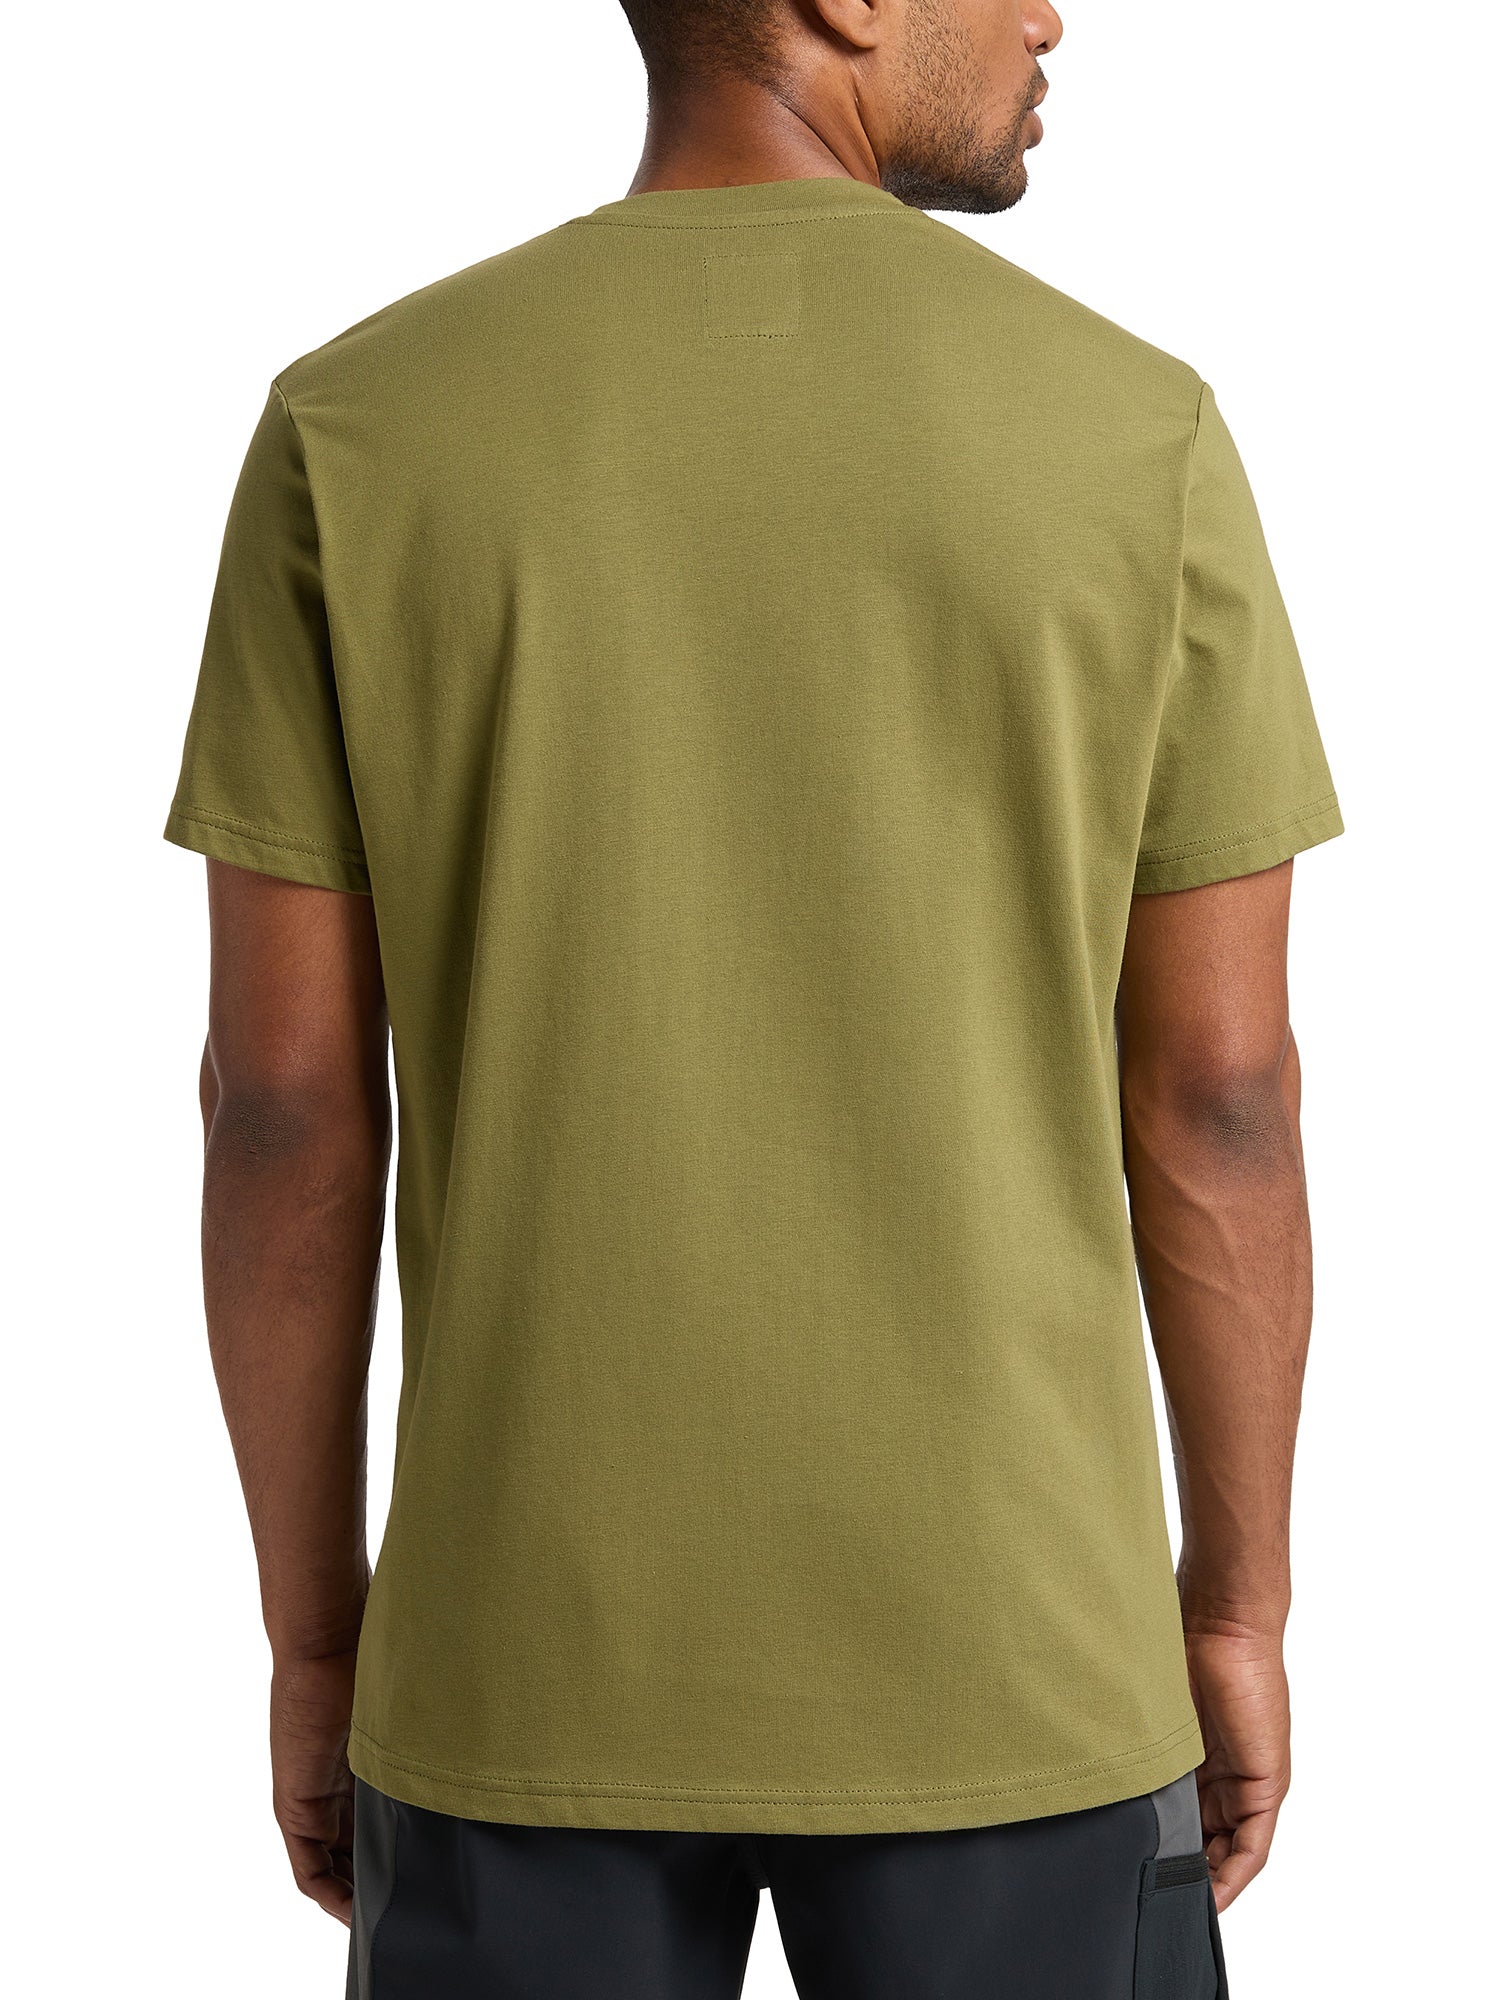 Outsider By Nature Tee Men